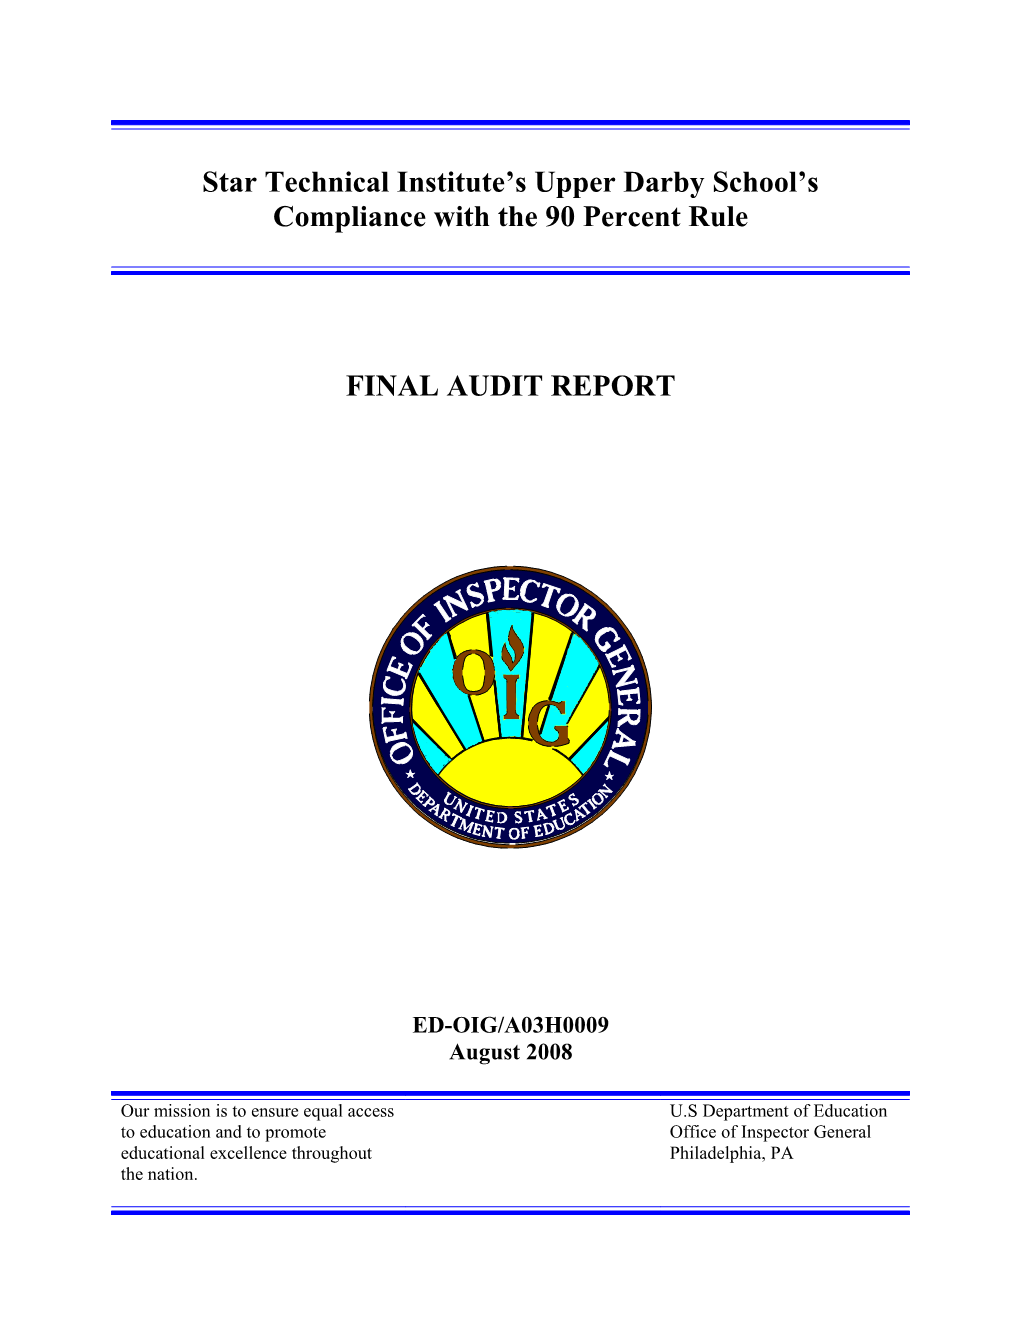 OIG Audit Report: Star Technical Institute's Upper Darby School's Compliance with the 90